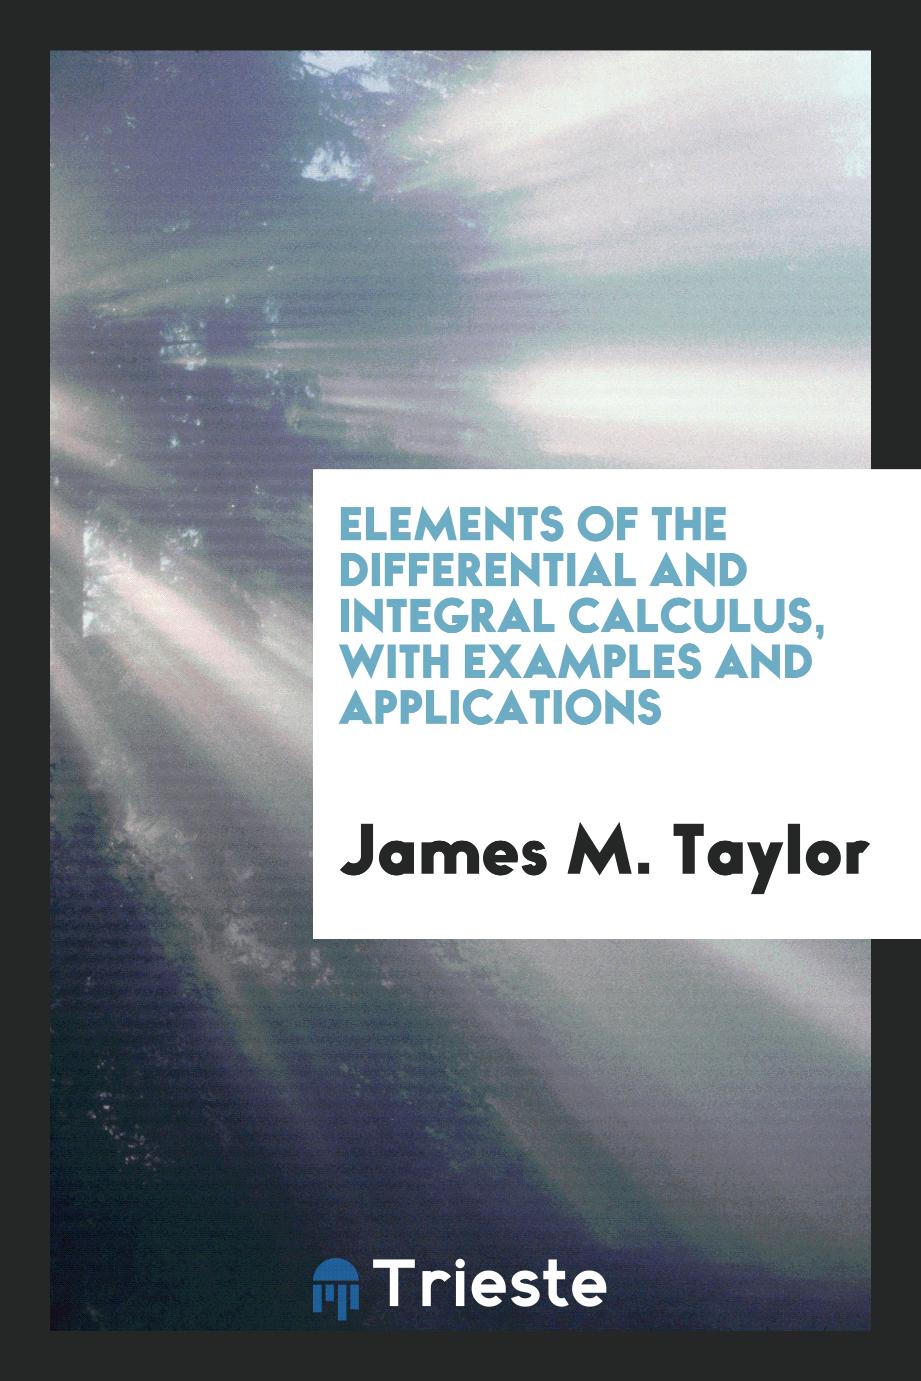 Elements of the differential and integral calculus, with examples and applications